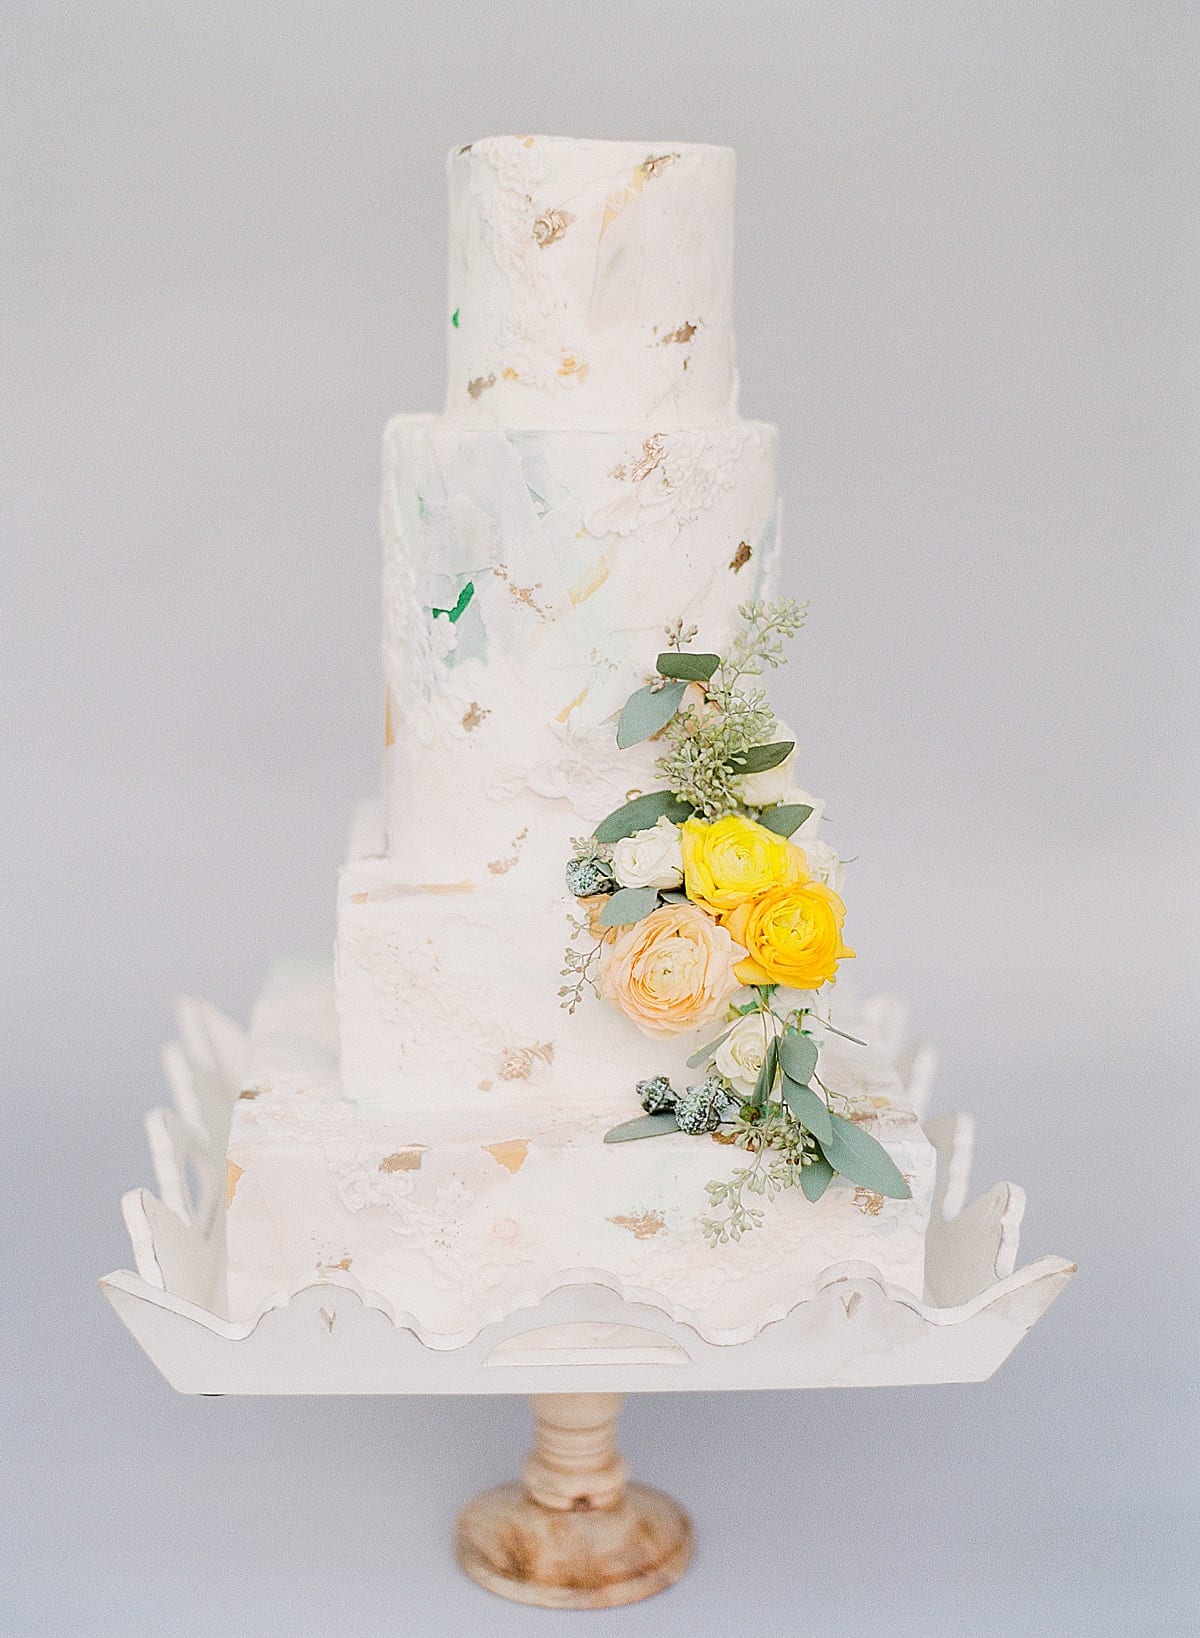 Four Tier Large Cake With Flowers Photos